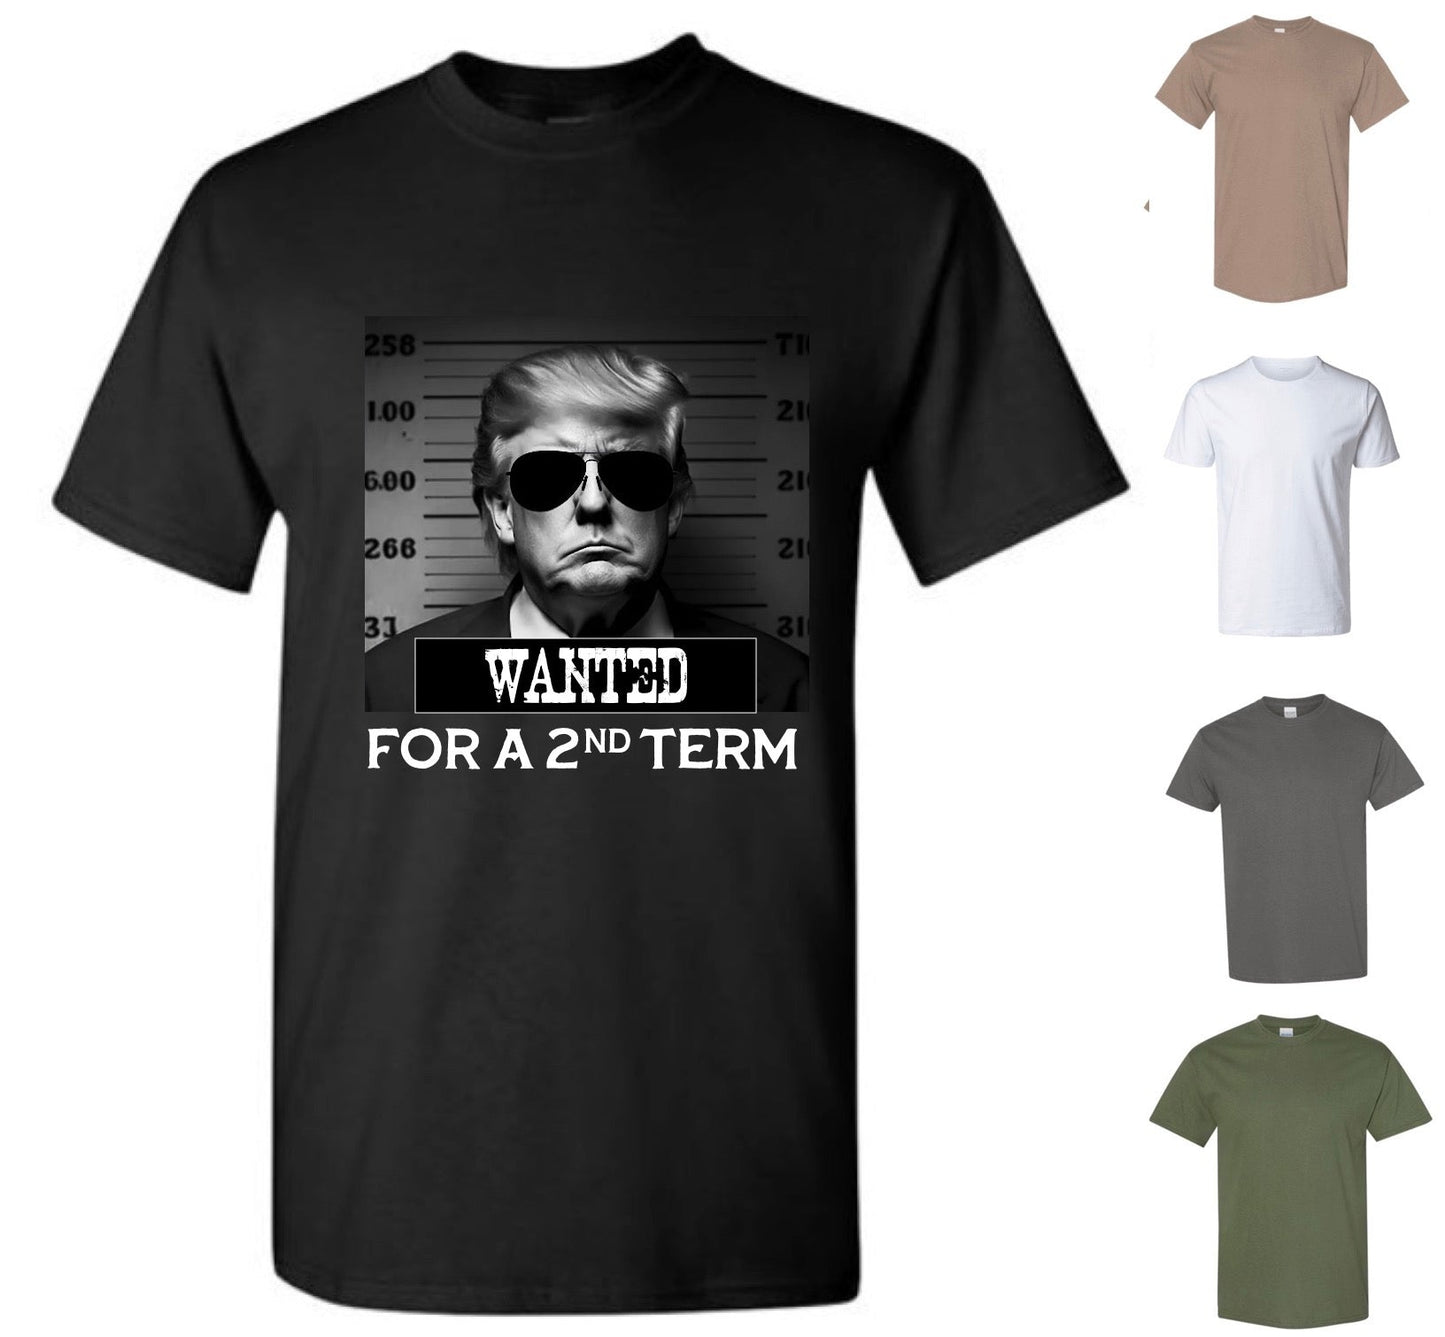 Wanted For A 2nd Term! (FREE Shipping)